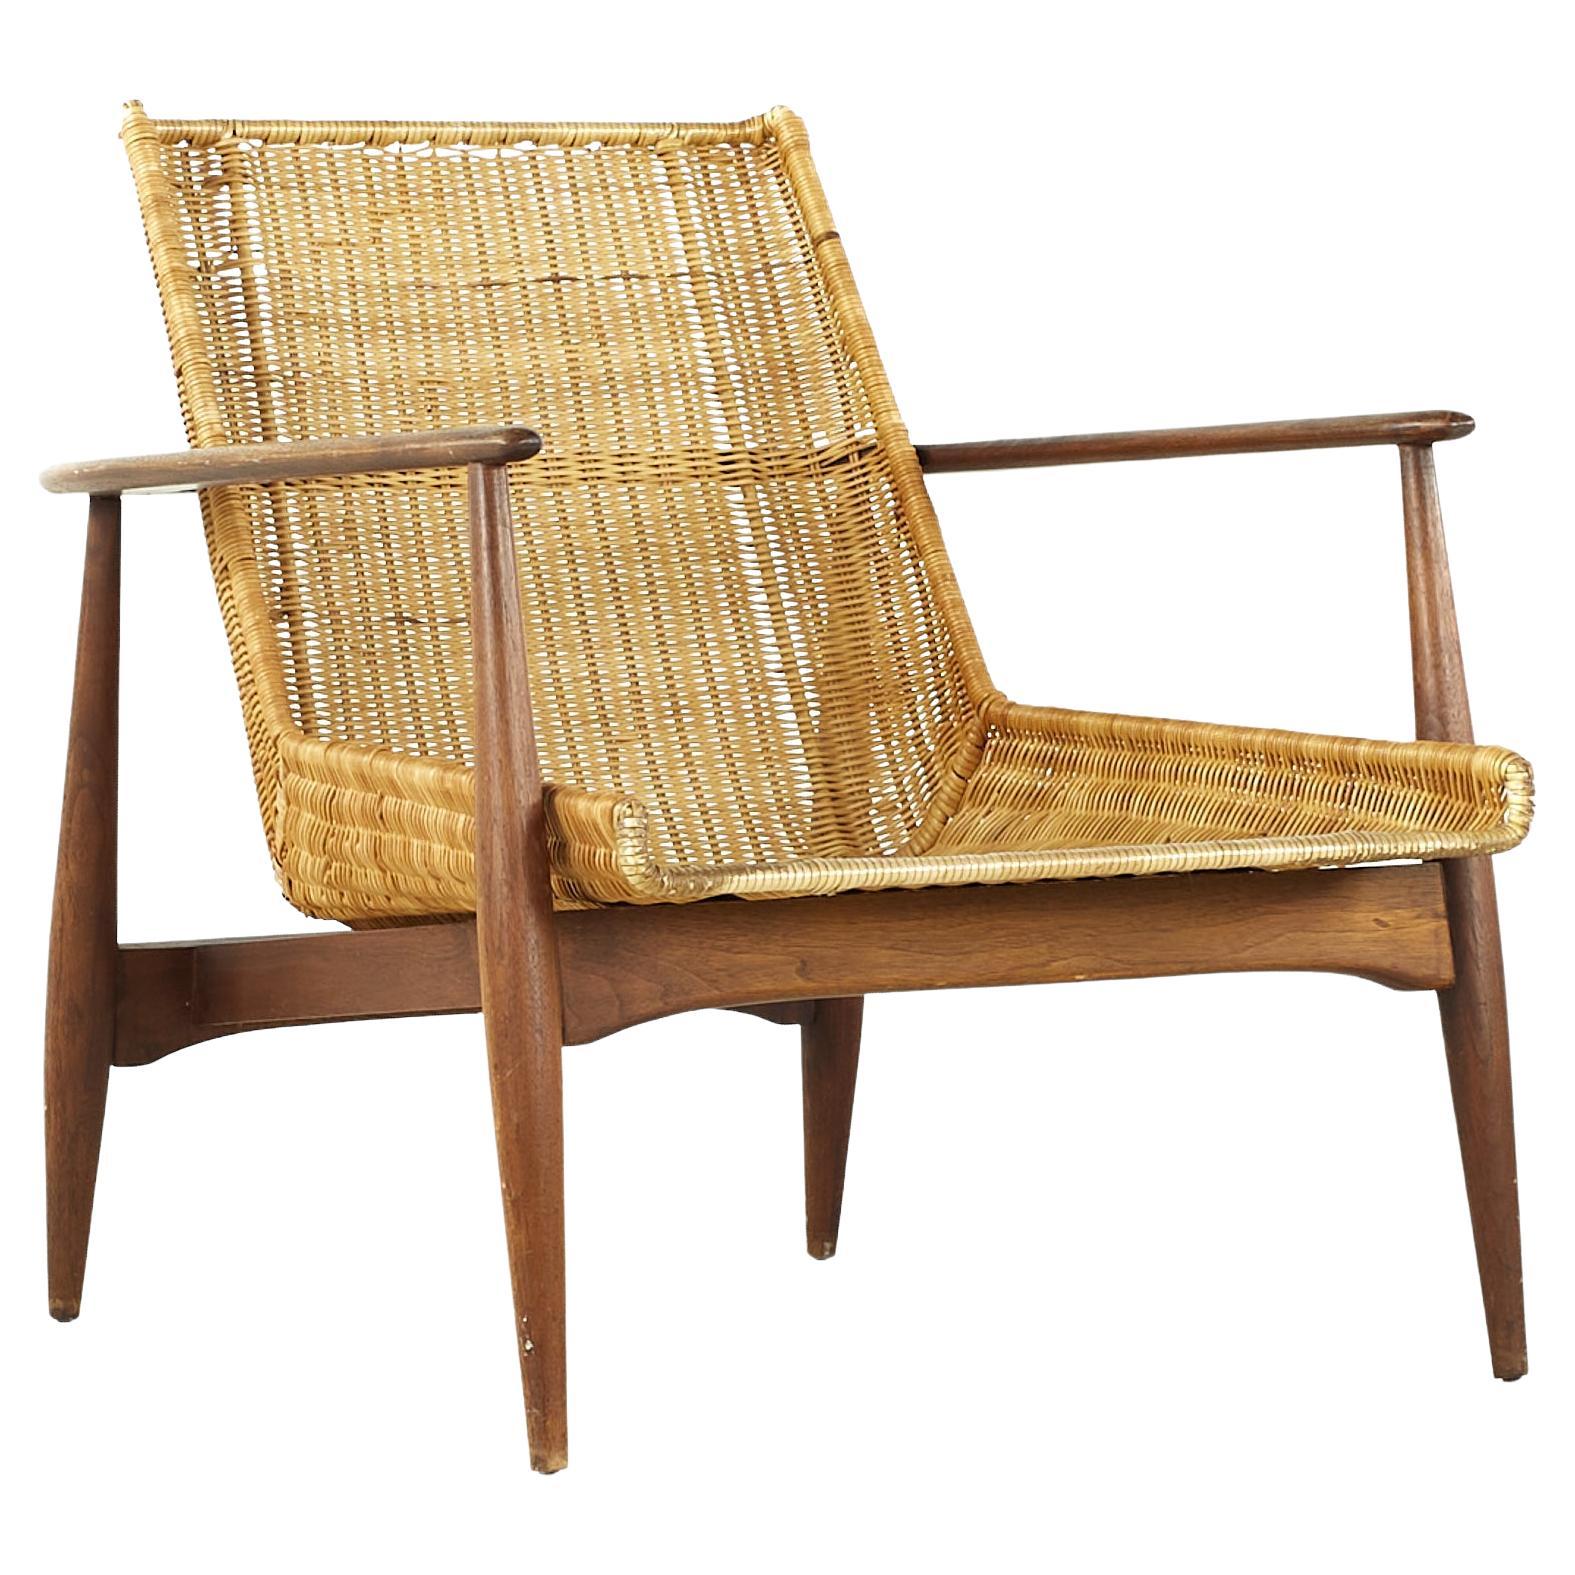 Lawrence Peabody for Richardson Nemschoff Midcentury Cane Lounge Chair